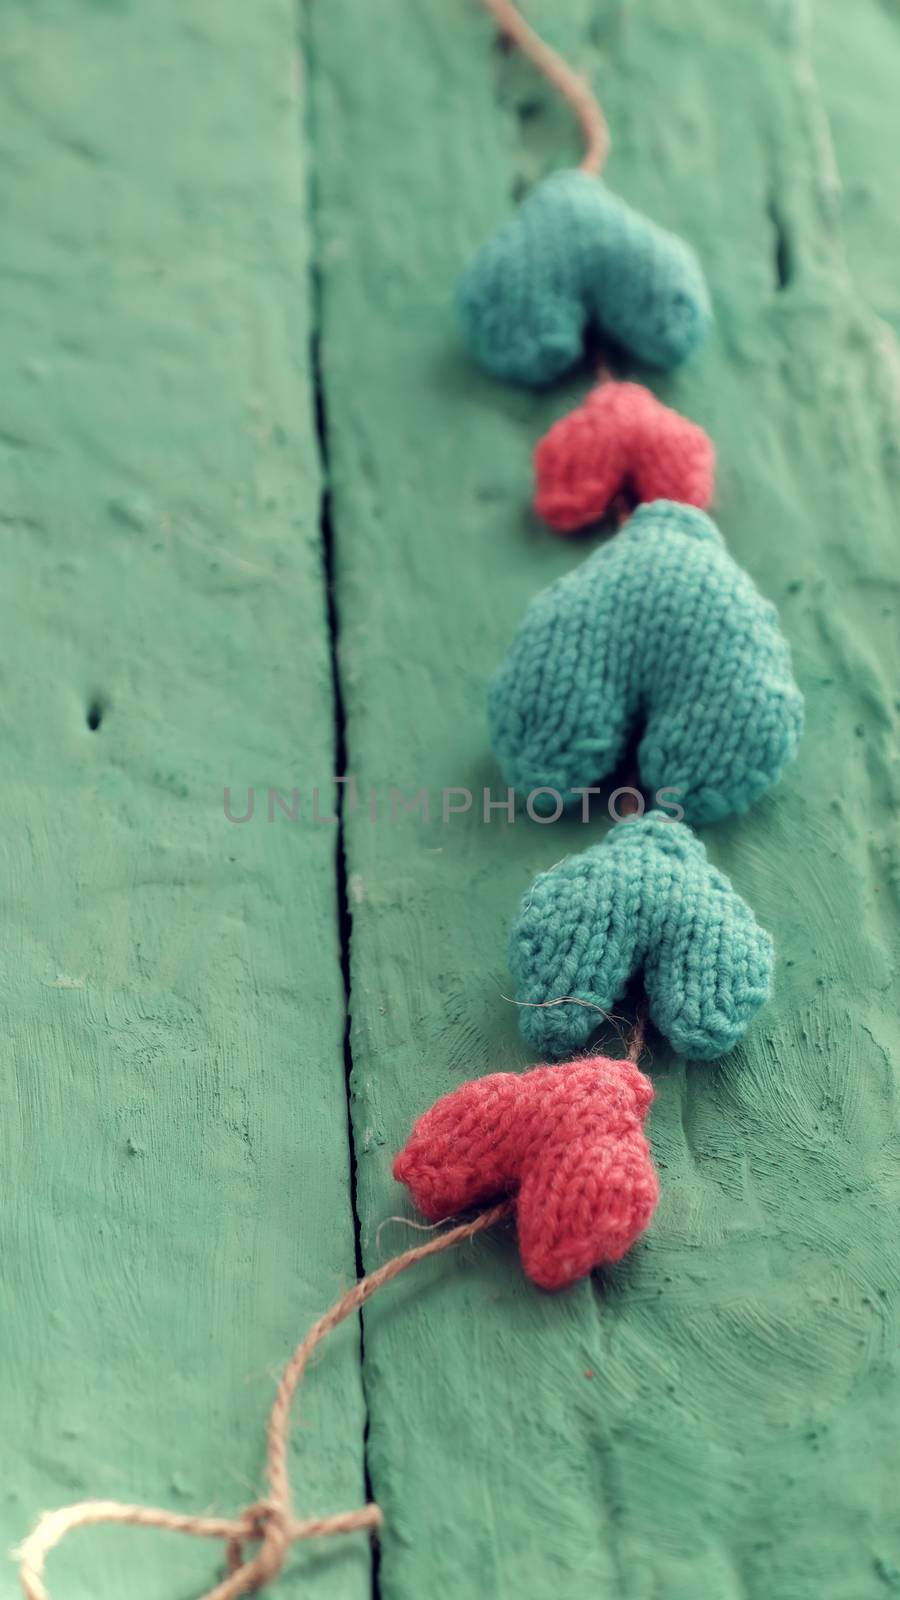 Group of valentine background with red and green heart on green wooden in vintage color, knitted heart is symbol for romantic love of couple in feb 14